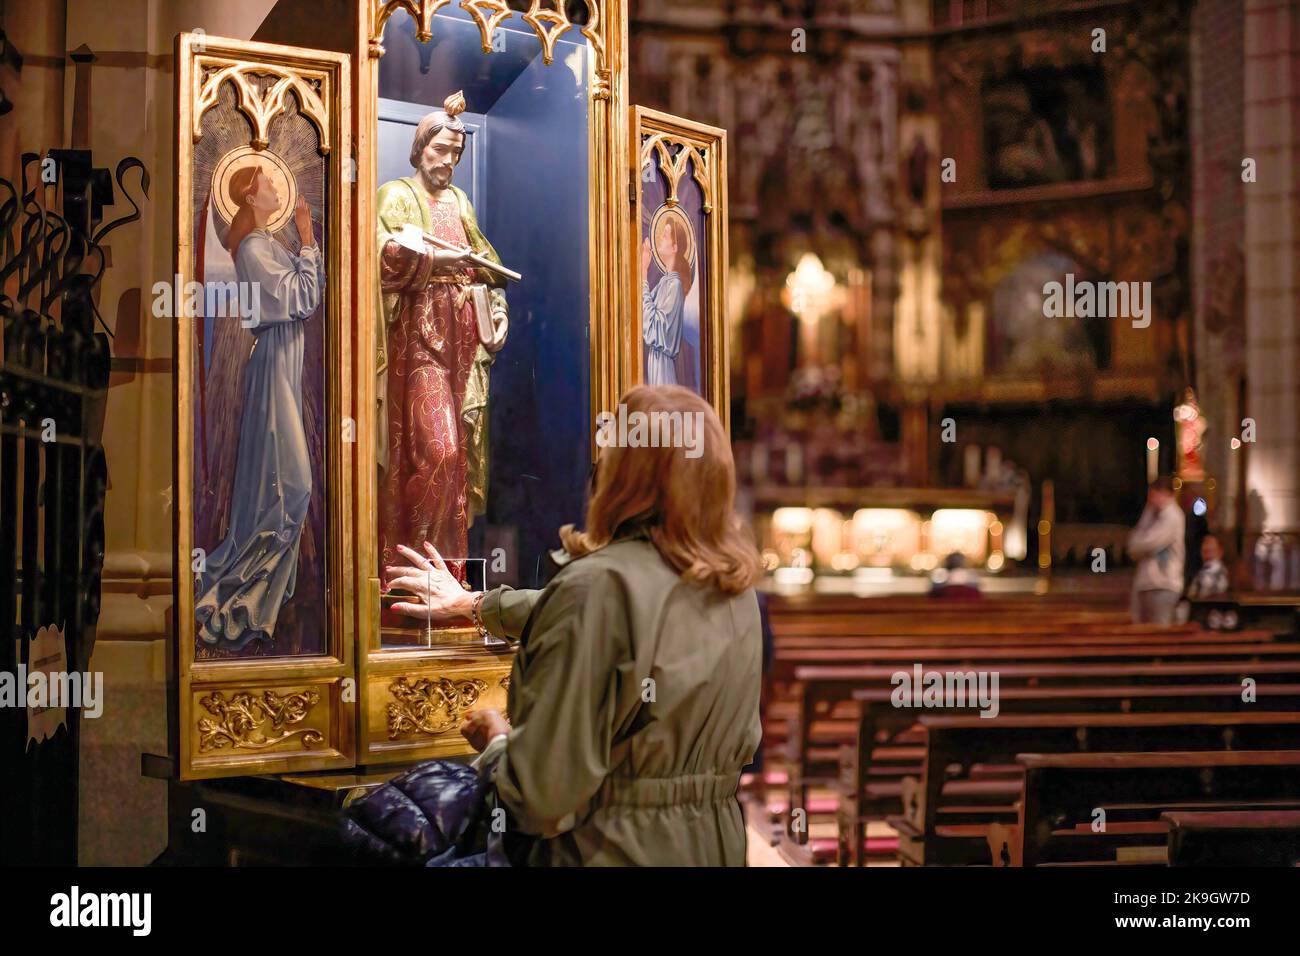 A woman prays and her right hand touches the interior of the image of San Judas Tadeo inside the Santa Cruz Church in central Madrid during the celebration of the day of San Judas Tadeo. Every October 28th, the day of San Judas Tadeo is celebrated, patron saint of lost and difficult causes. In the centre of Madrid, on Atocha street, the church of Santa Cruz is located, which houses the image of San Judas Tadeo to which thousands of Catholic believers come to touch it and ask for its prayers. (Photo by Luis Soto/SOPA Images/Sipa USA) Stock Photo